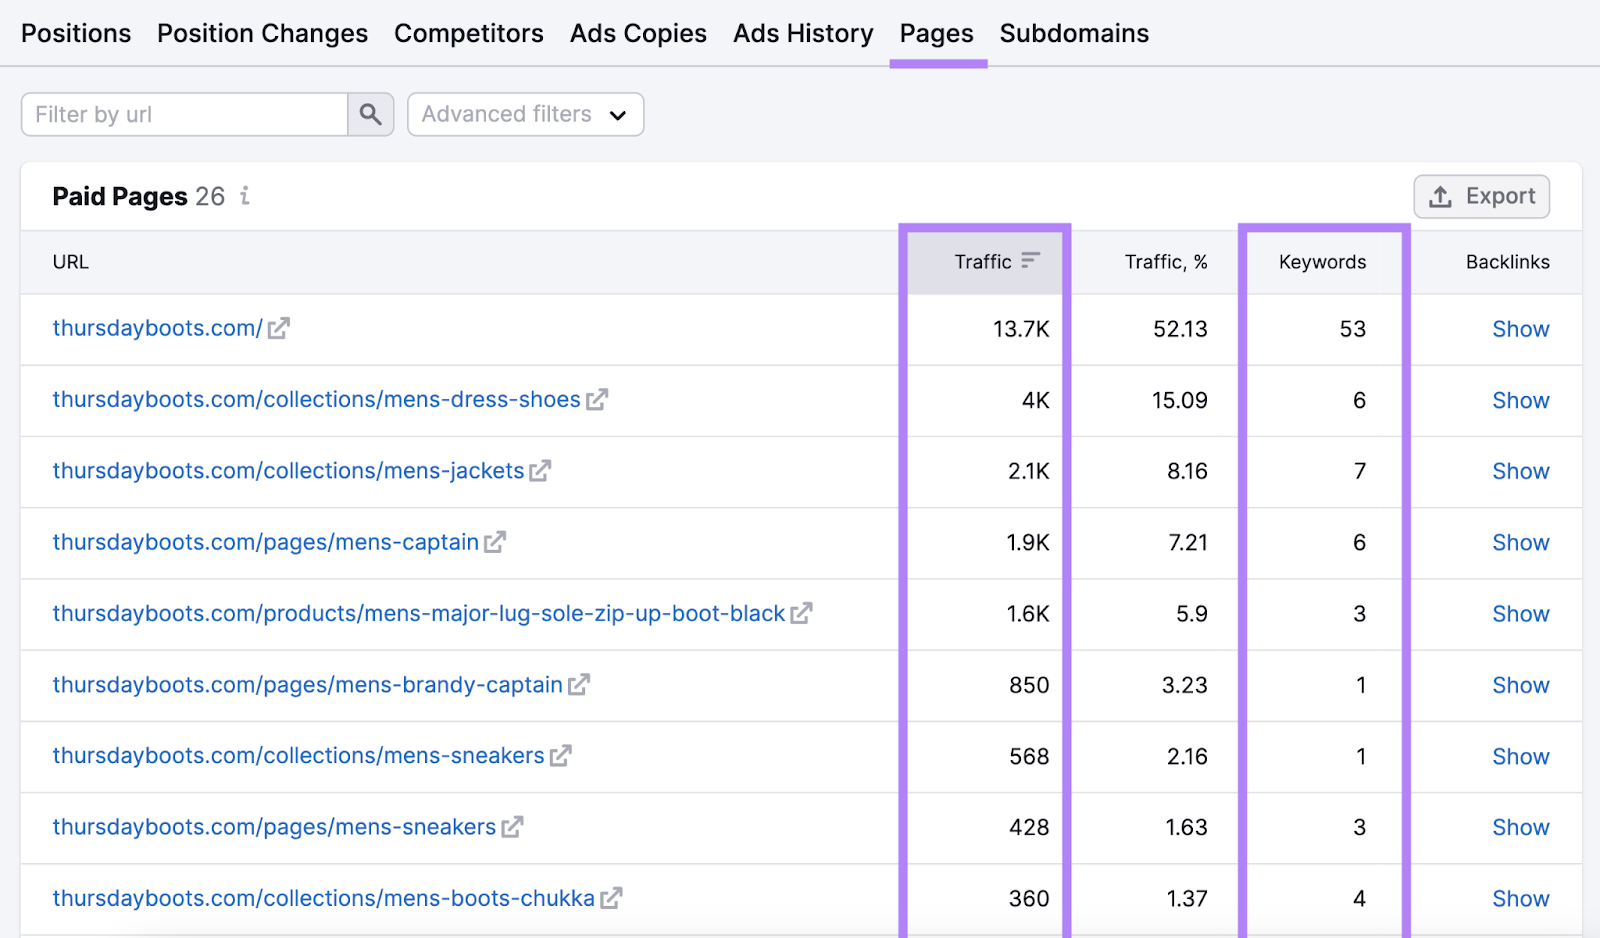 table showing paid pages, where ads lead to, with their traffic and keywords